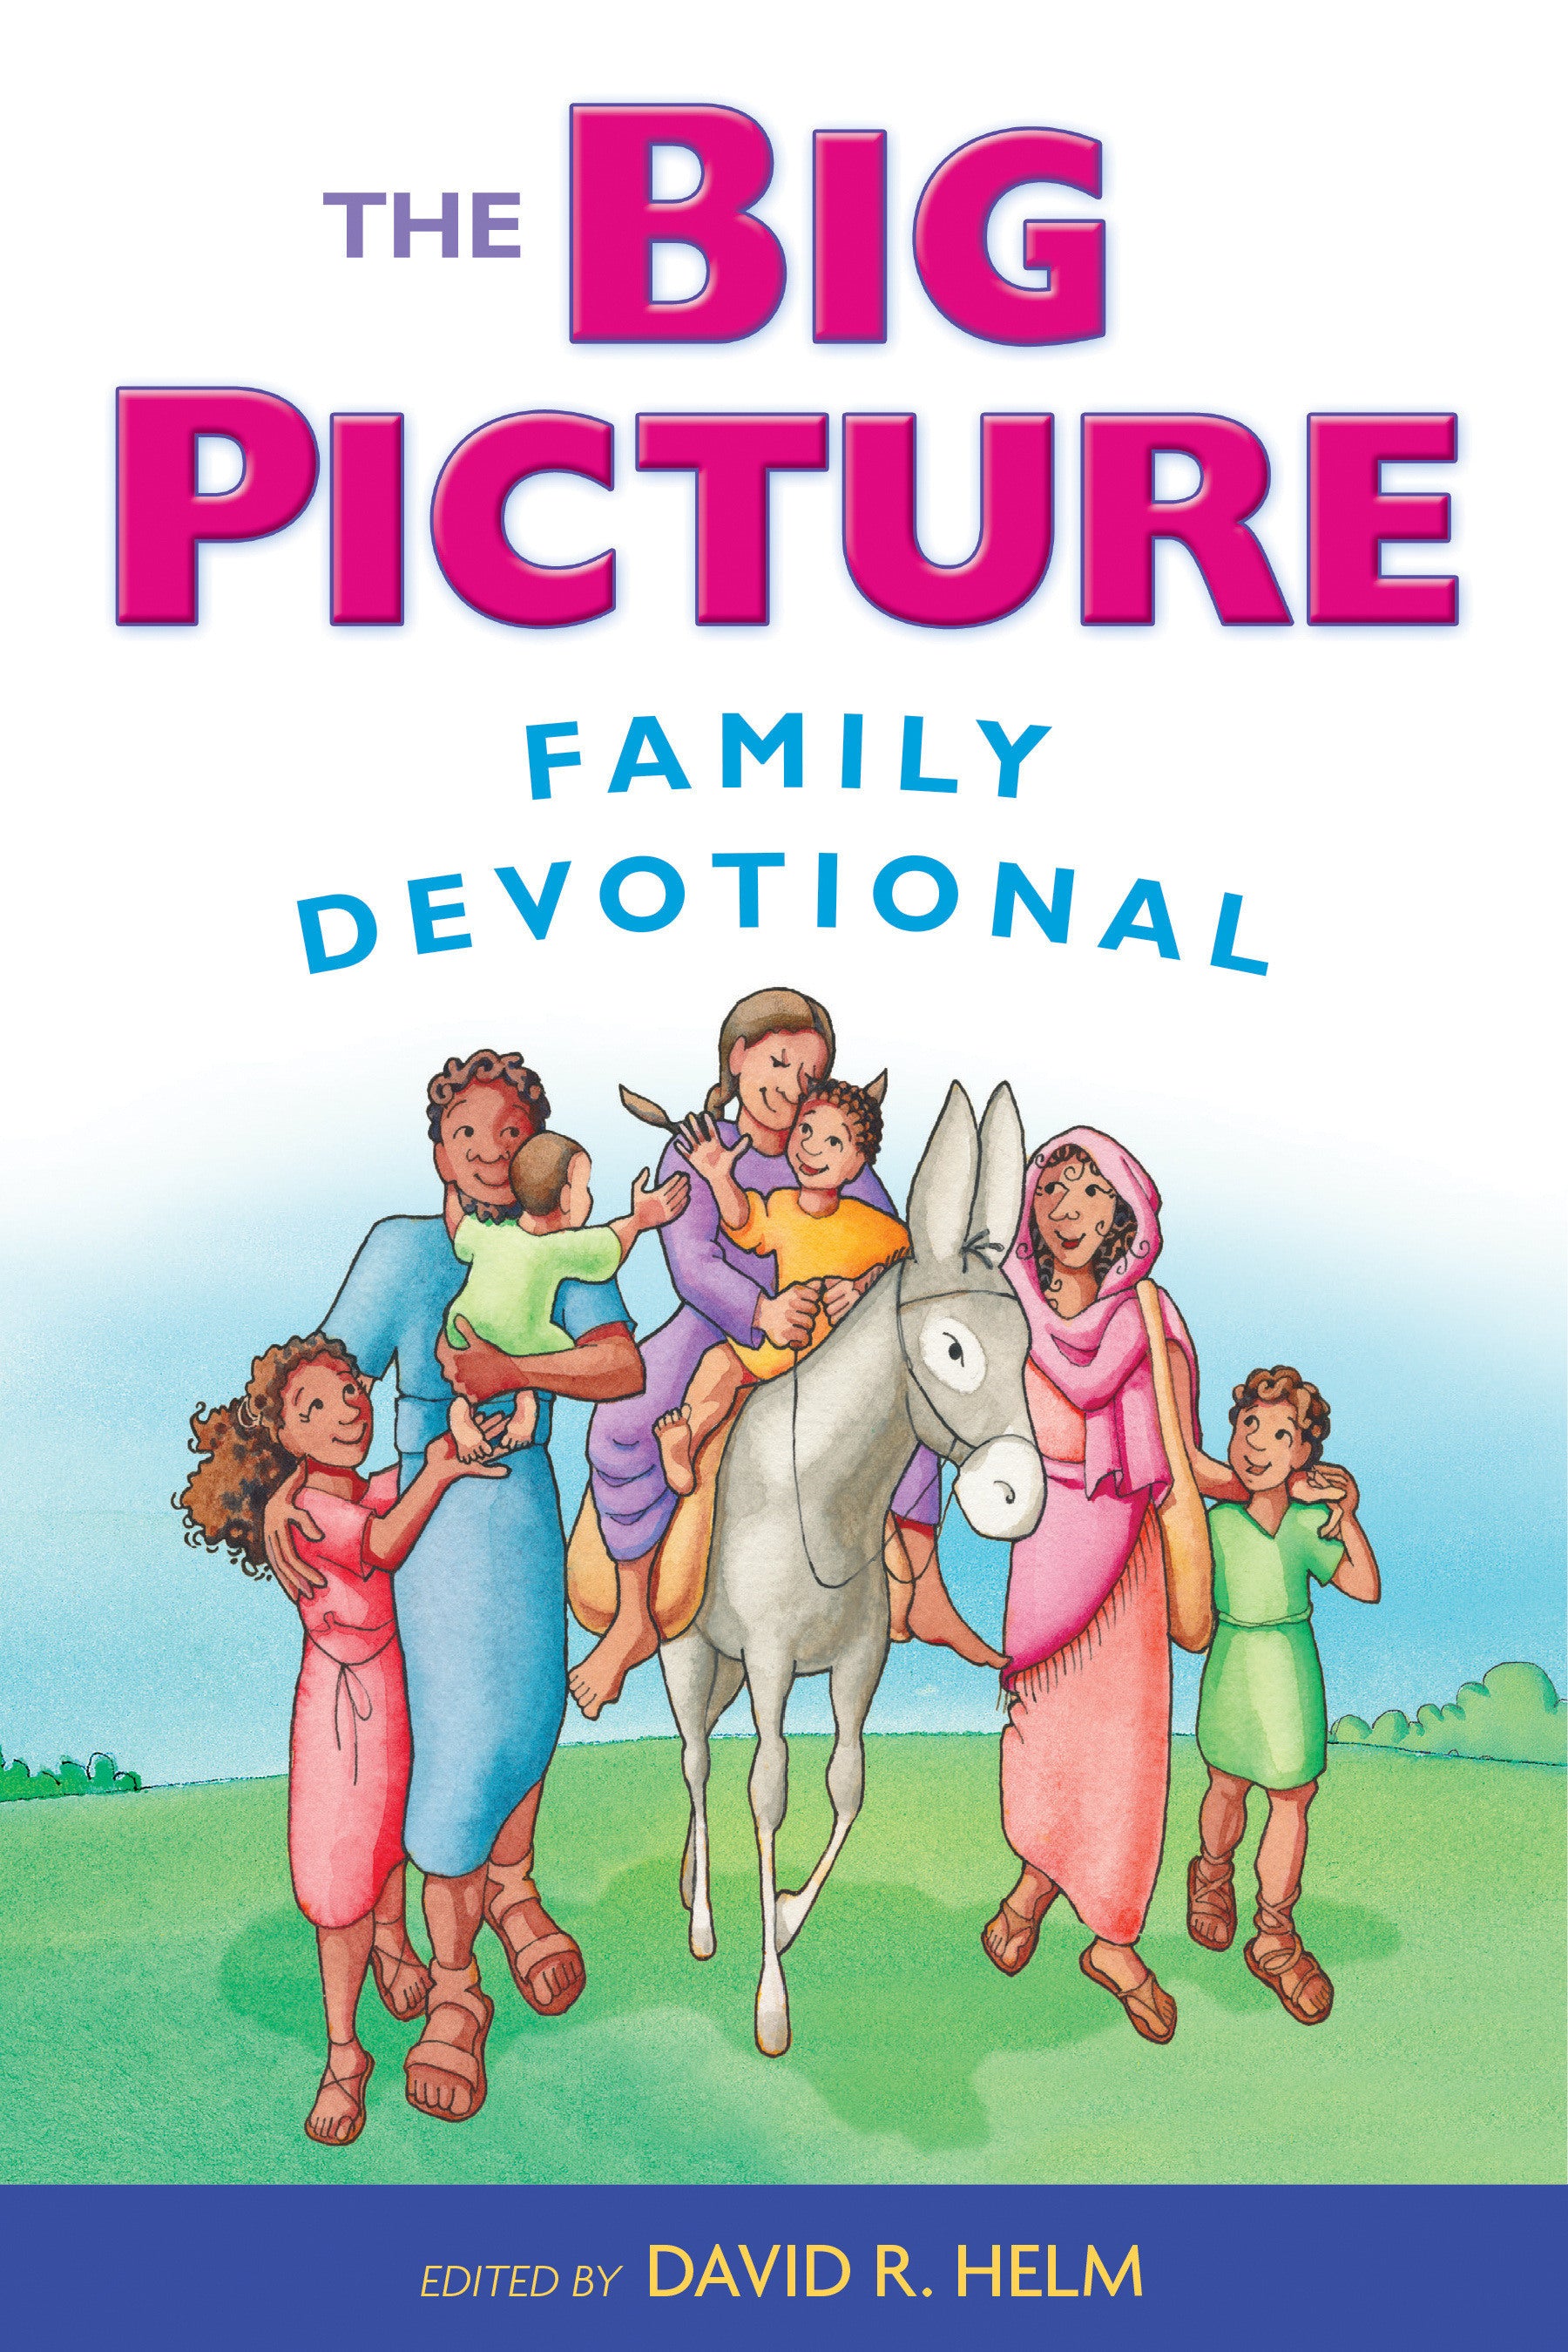 Image of The Big Picture Family Devotional other